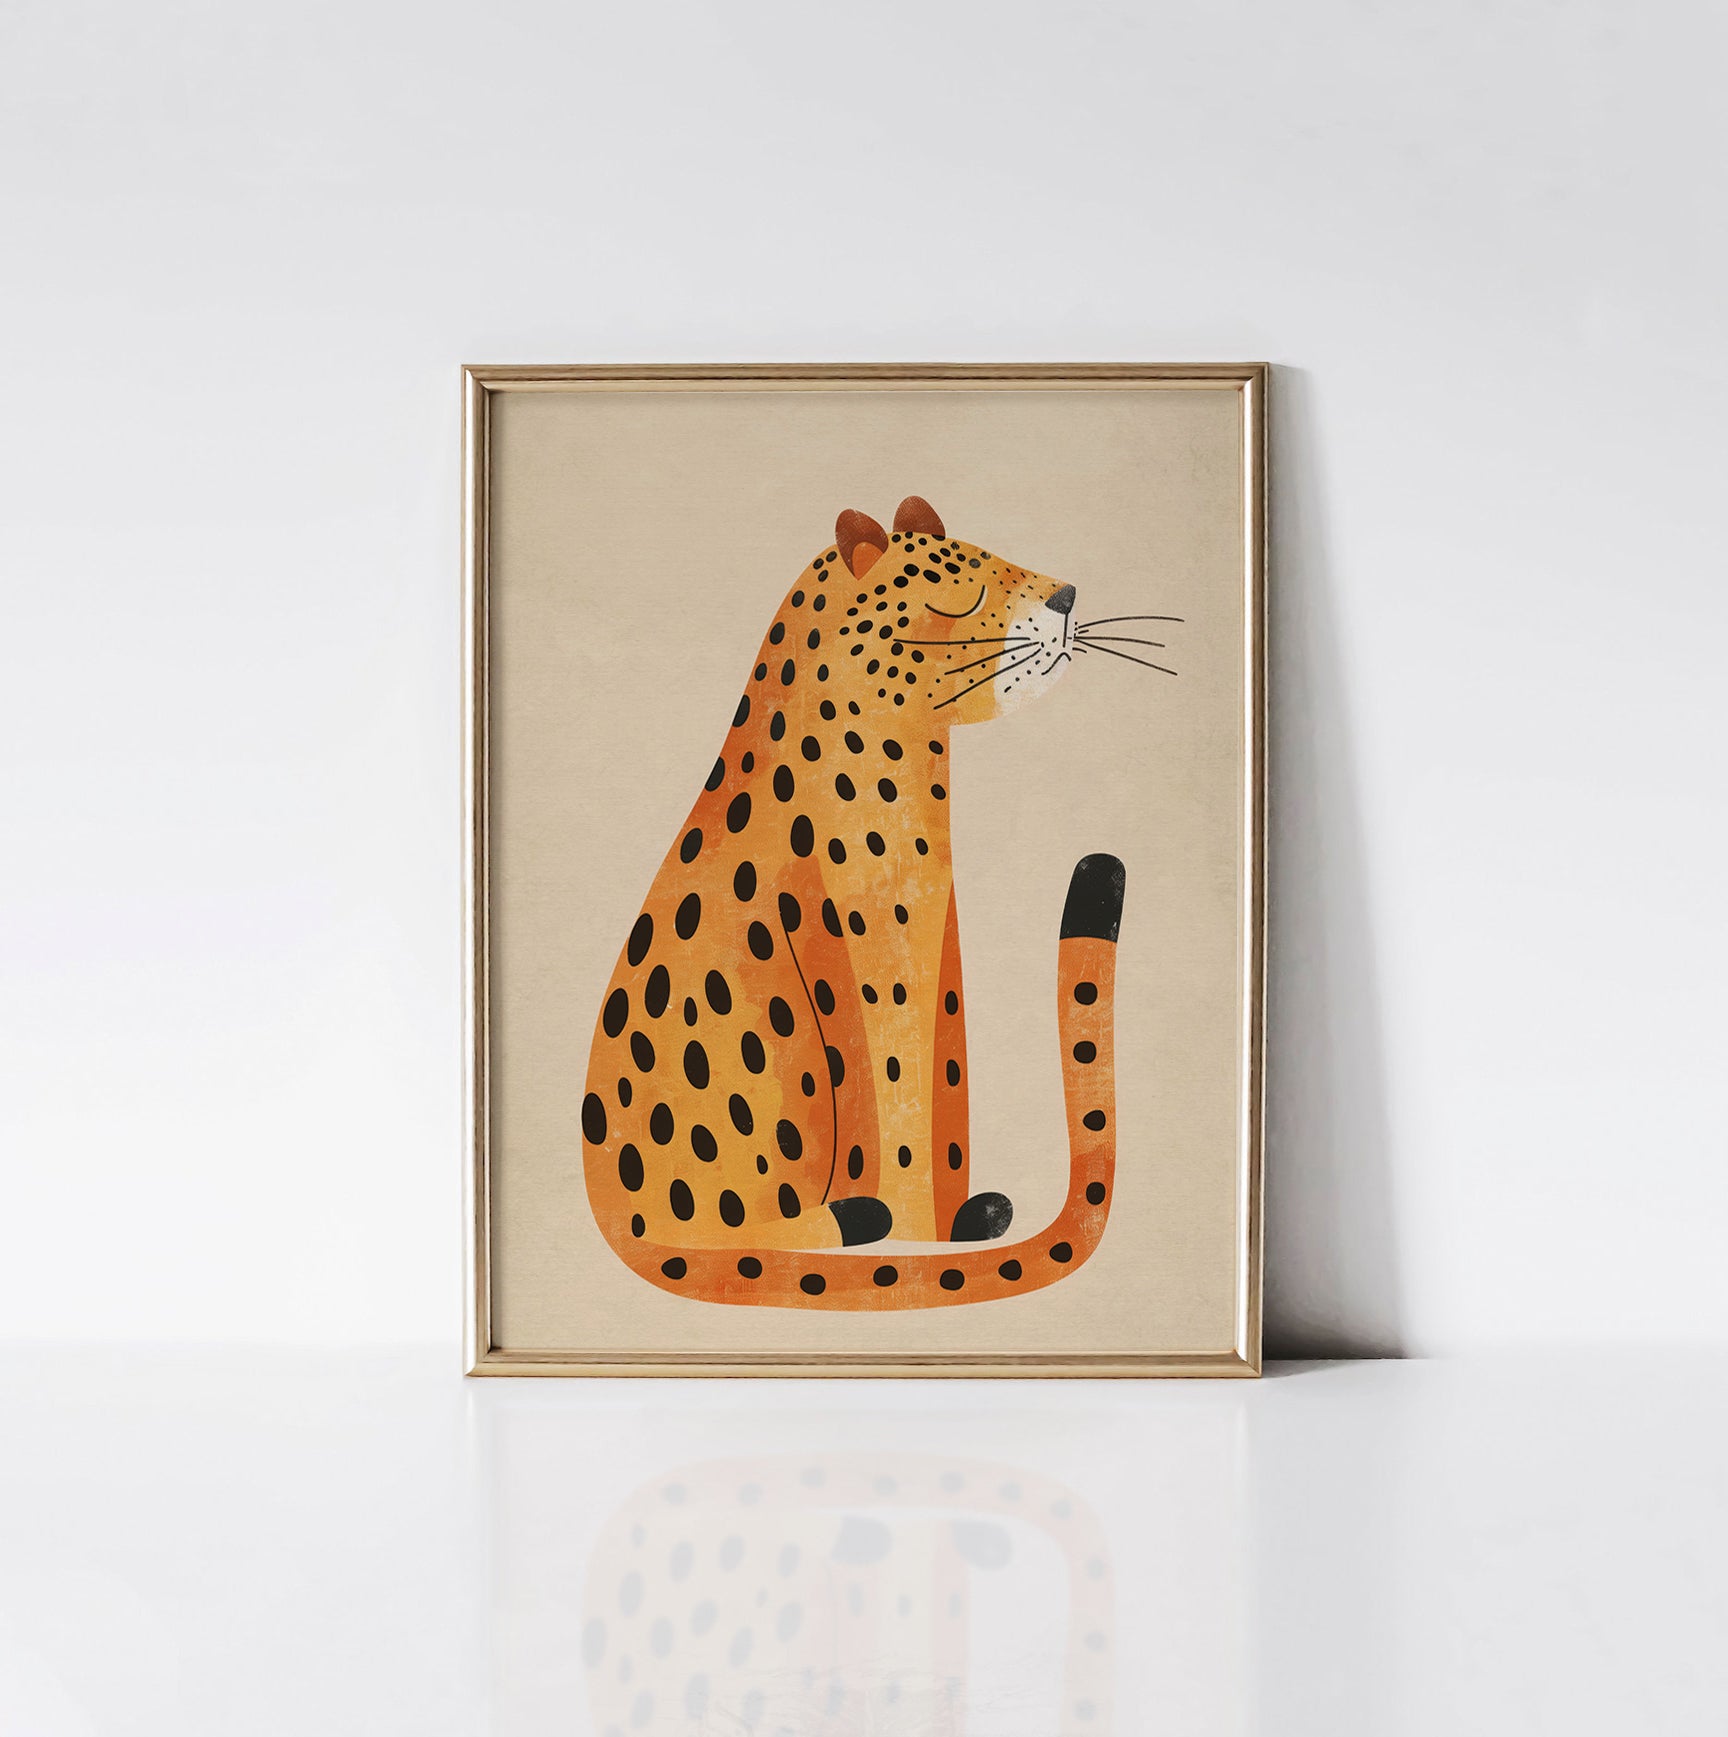 Calm Leopard art print displayed in a sleek gold frame, featuring a tranquil leopard against a soft beige background.